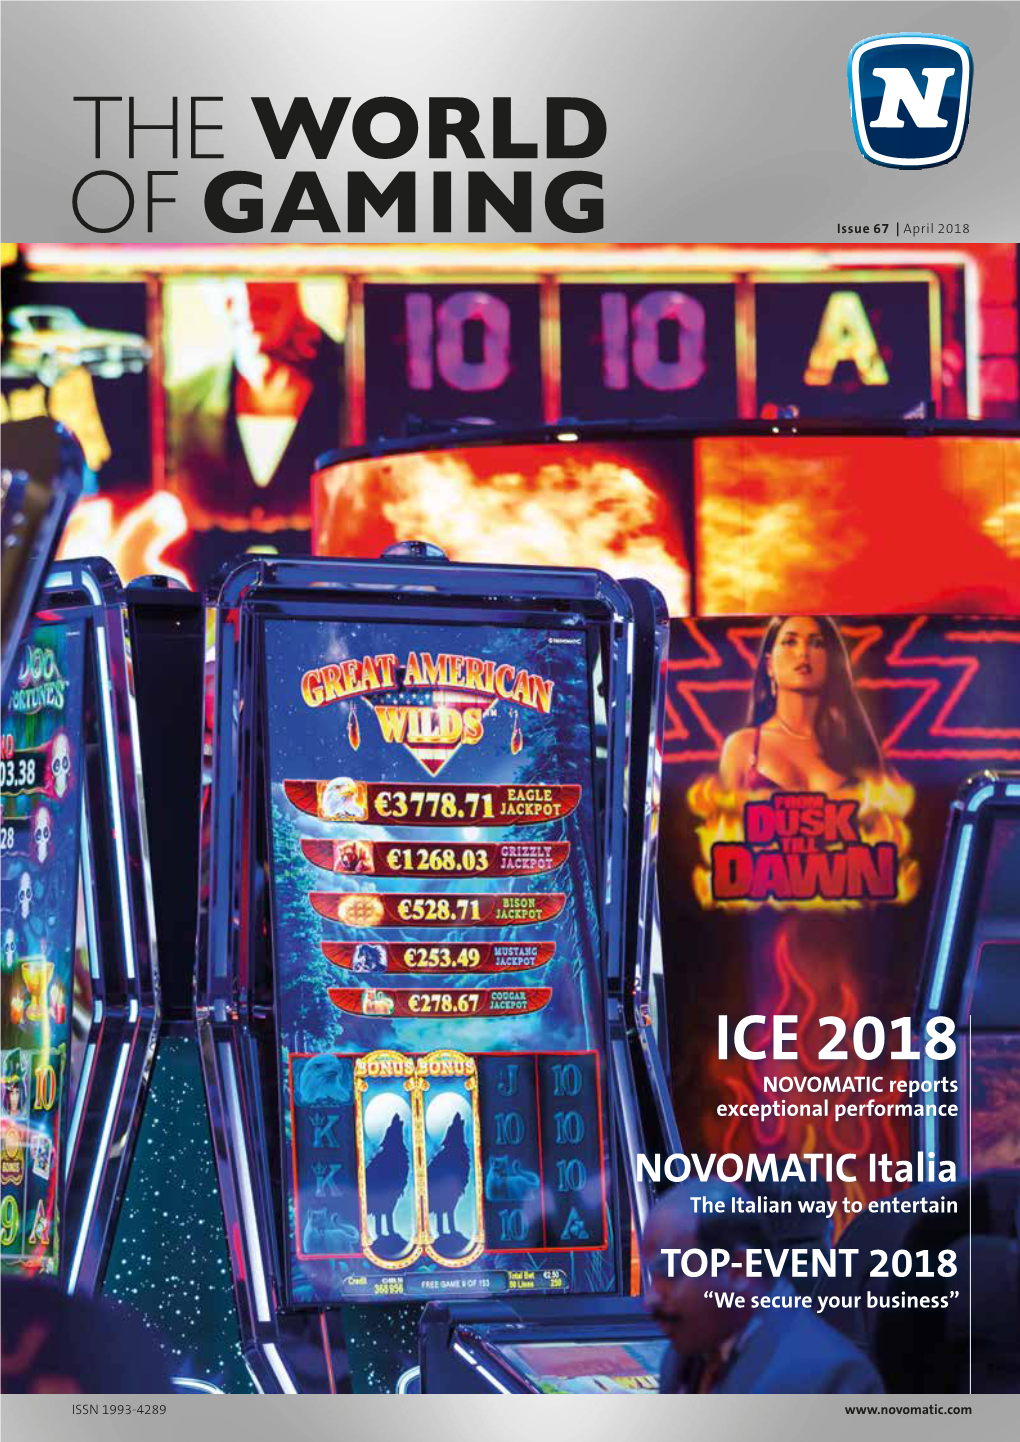 ICE 2018 NOVOMATIC Reports Exceptional Performance NOVOMATIC Italia the Italian Way to Entertain TOP-EVENT 2018 “We Secure Your Business”